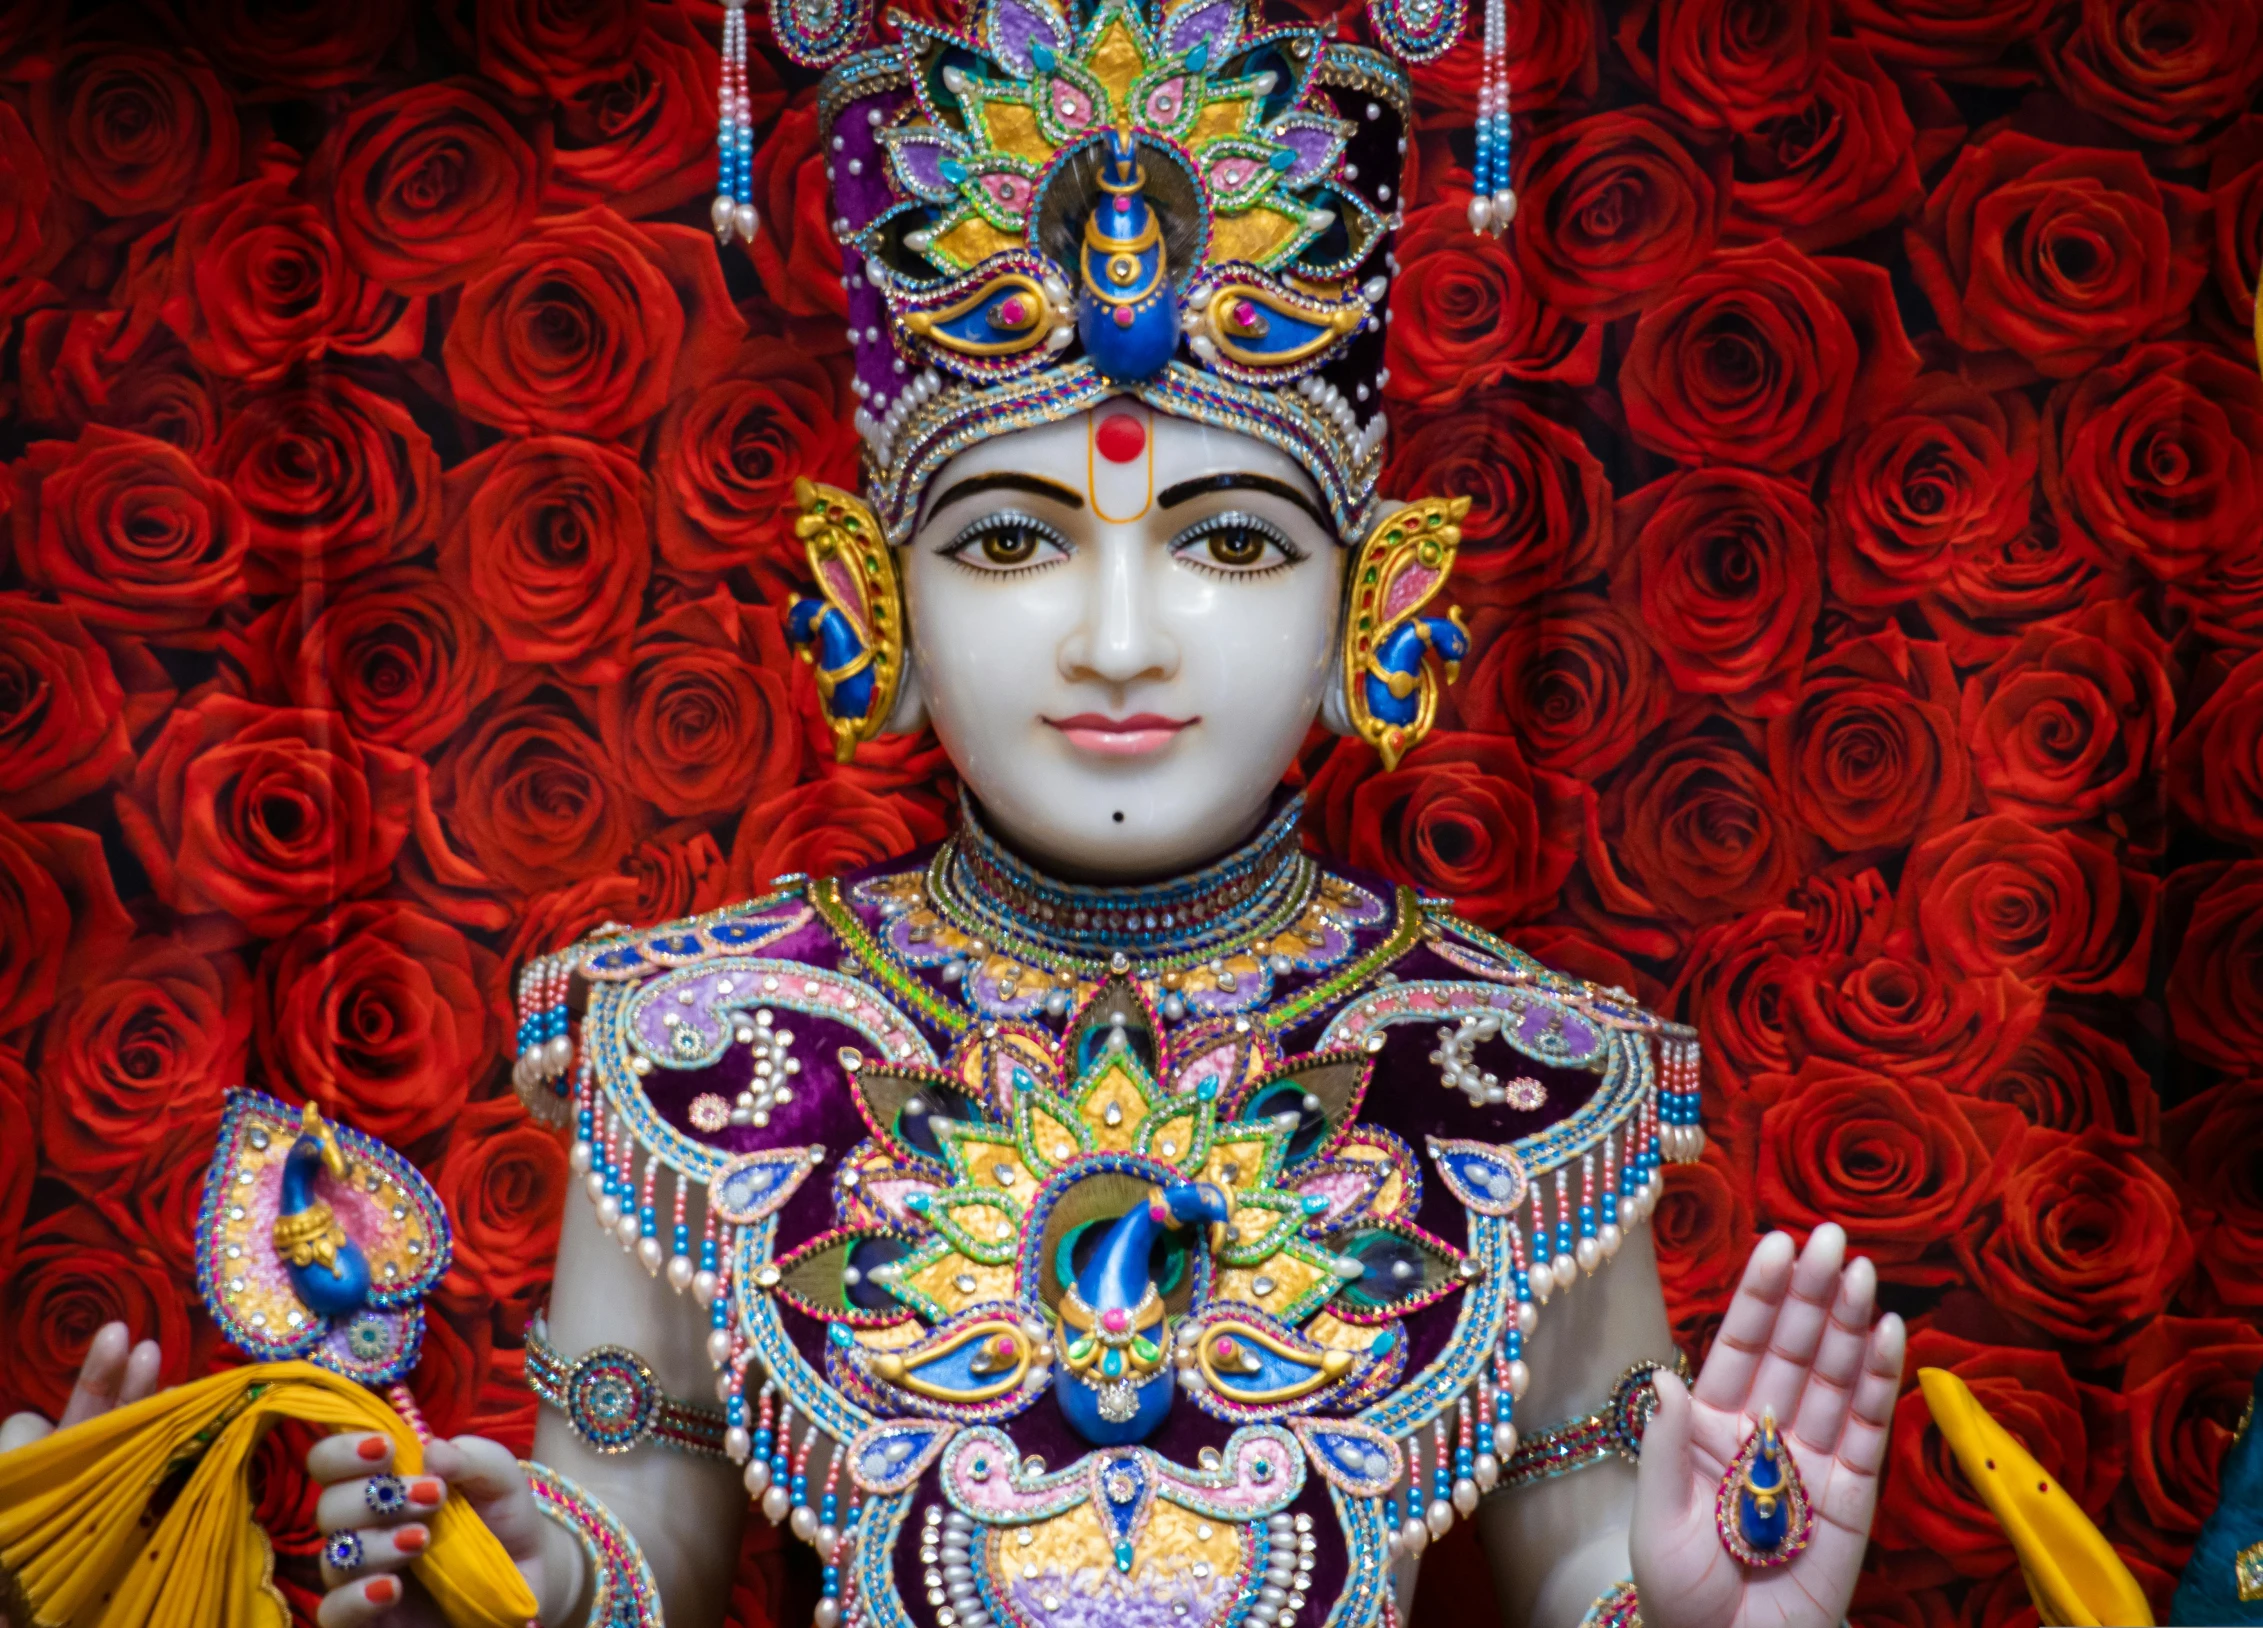 the statue of a hindu god is dressed in bright colors